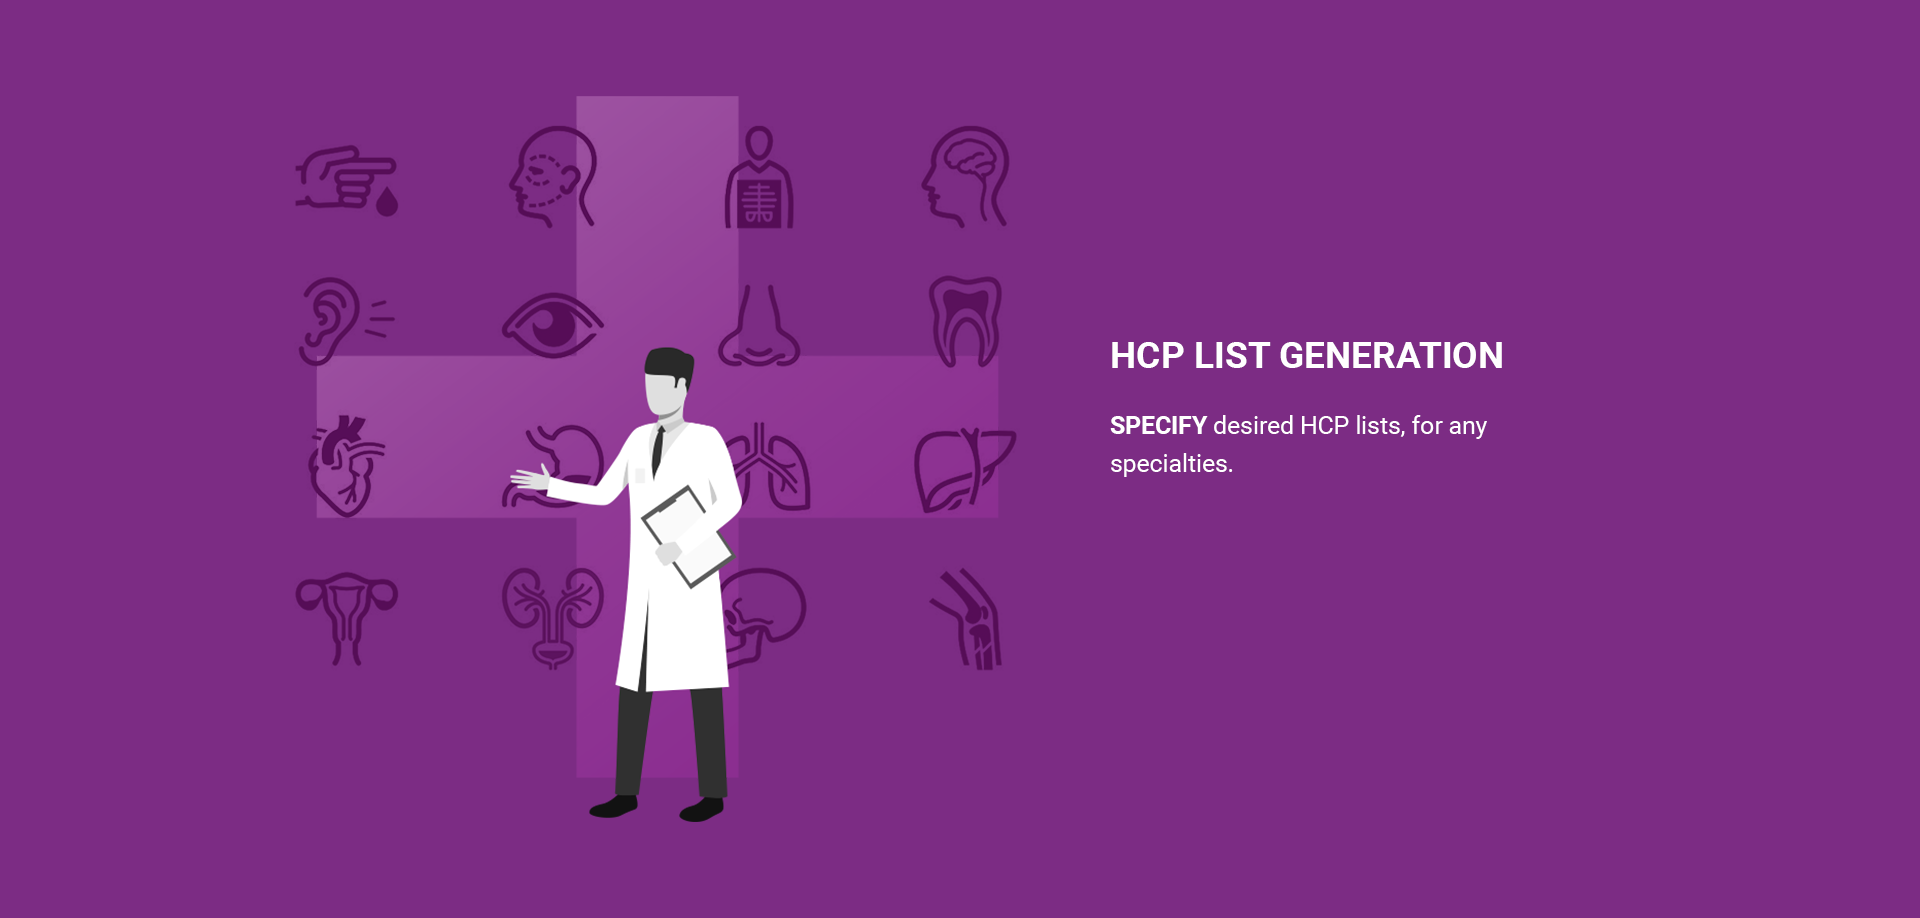 Purple graphic depicting a healthcare professional with various medical icons surrounding, alongside the text "HCP LIST GENERATION."